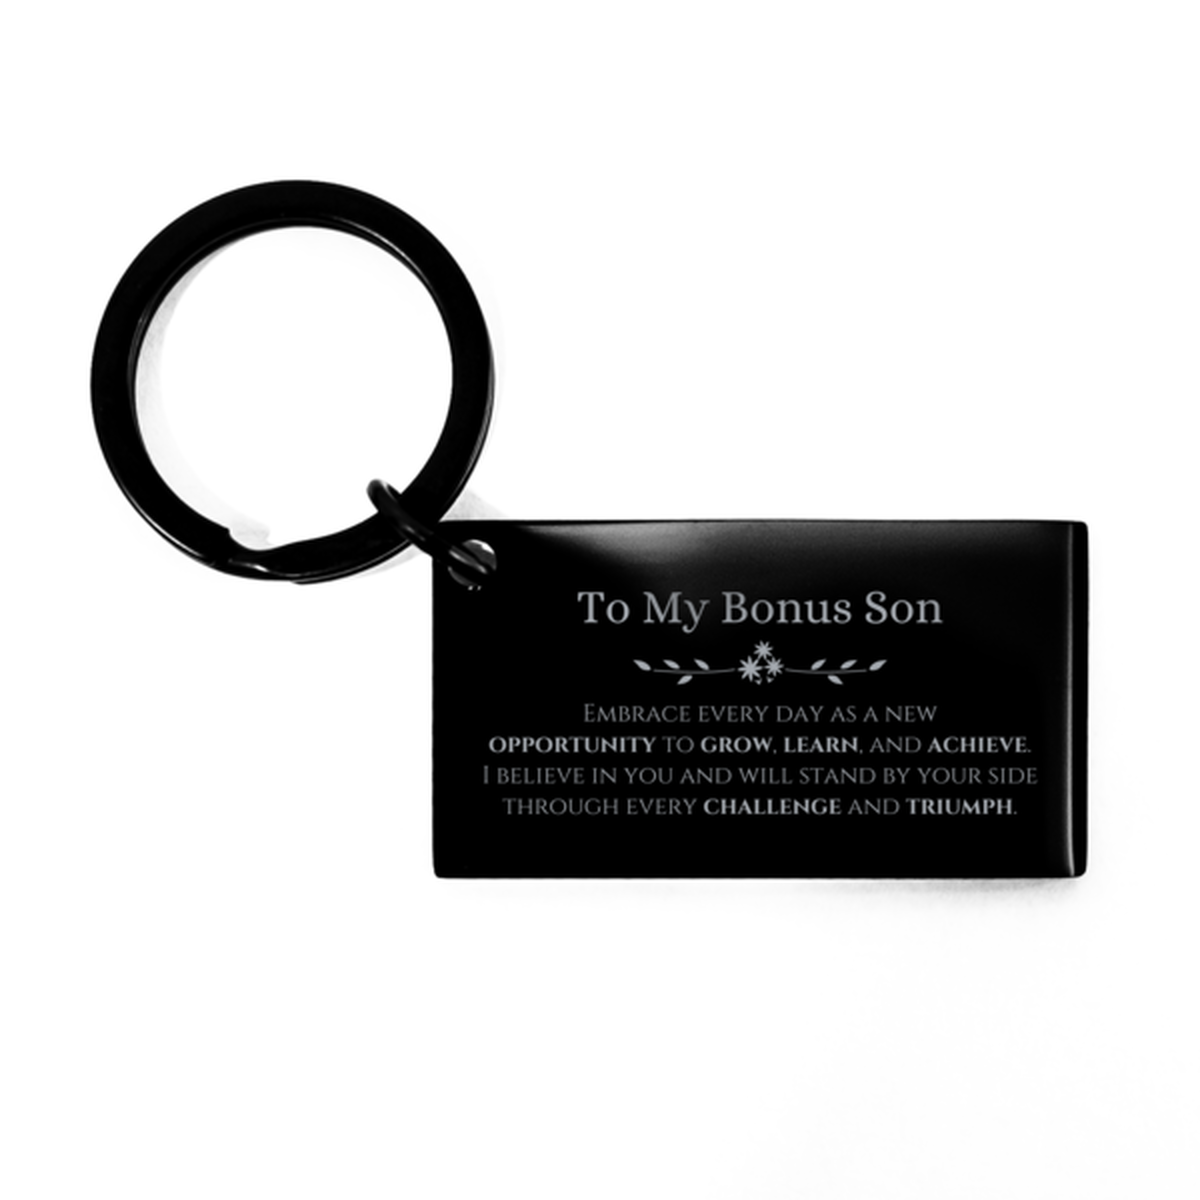 To My Bonus Son Gifts, I believe in you and will stand by your side, Inspirational Keychain For Bonus Son, Birthday Christmas Motivational Bonus Son Gifts